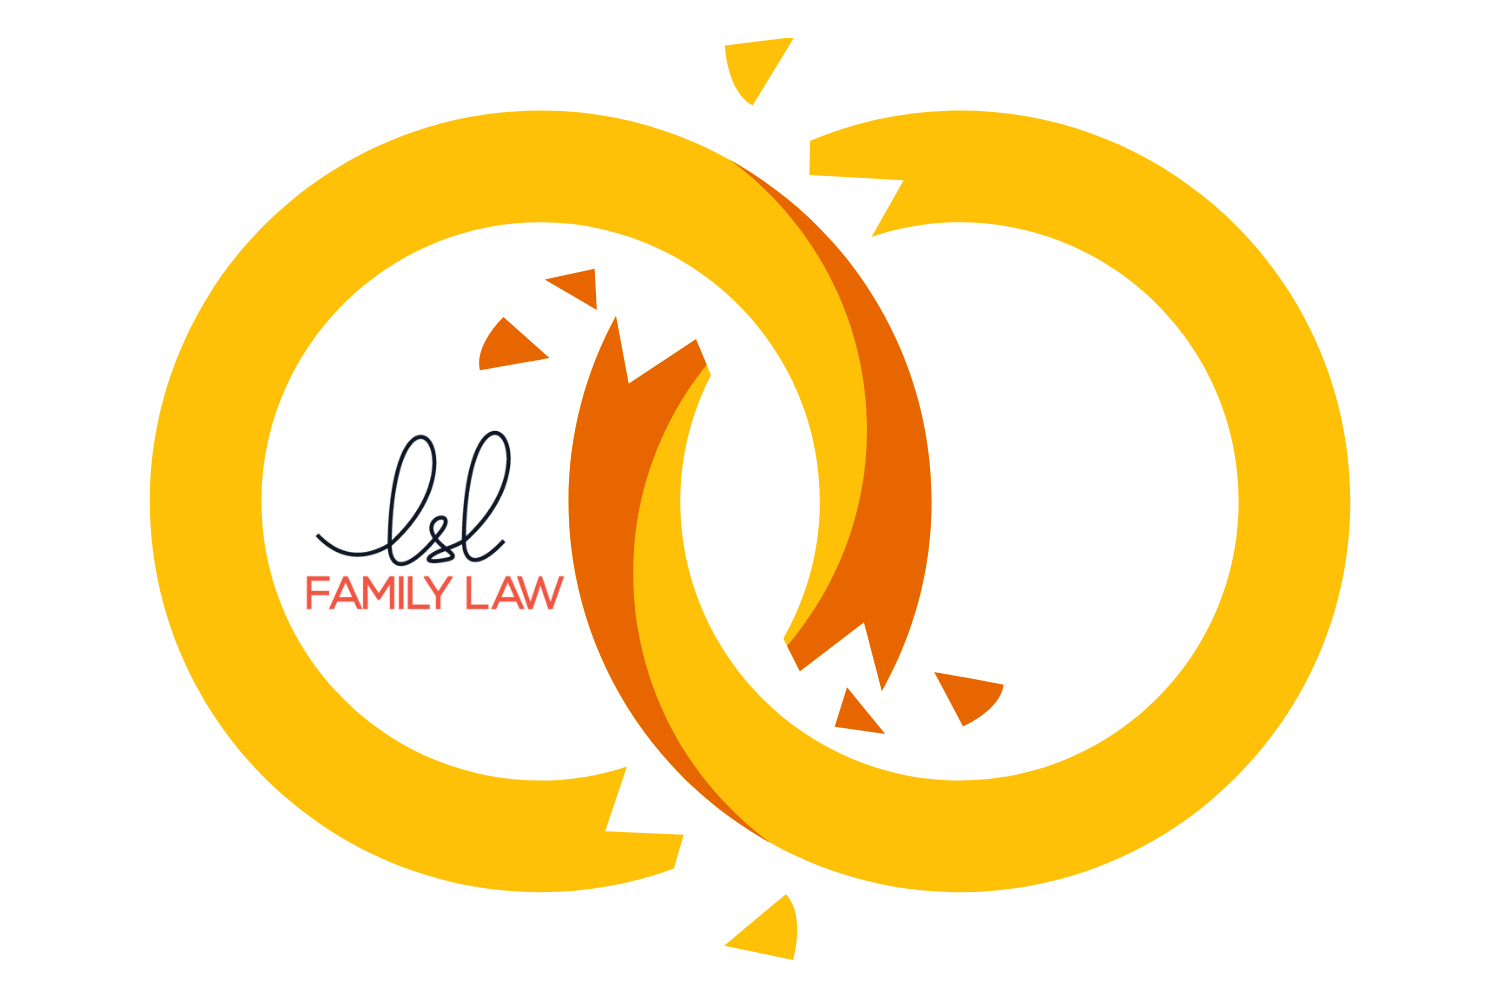 Separated wedding rings in a figure of 8 with LSL Family Law logo